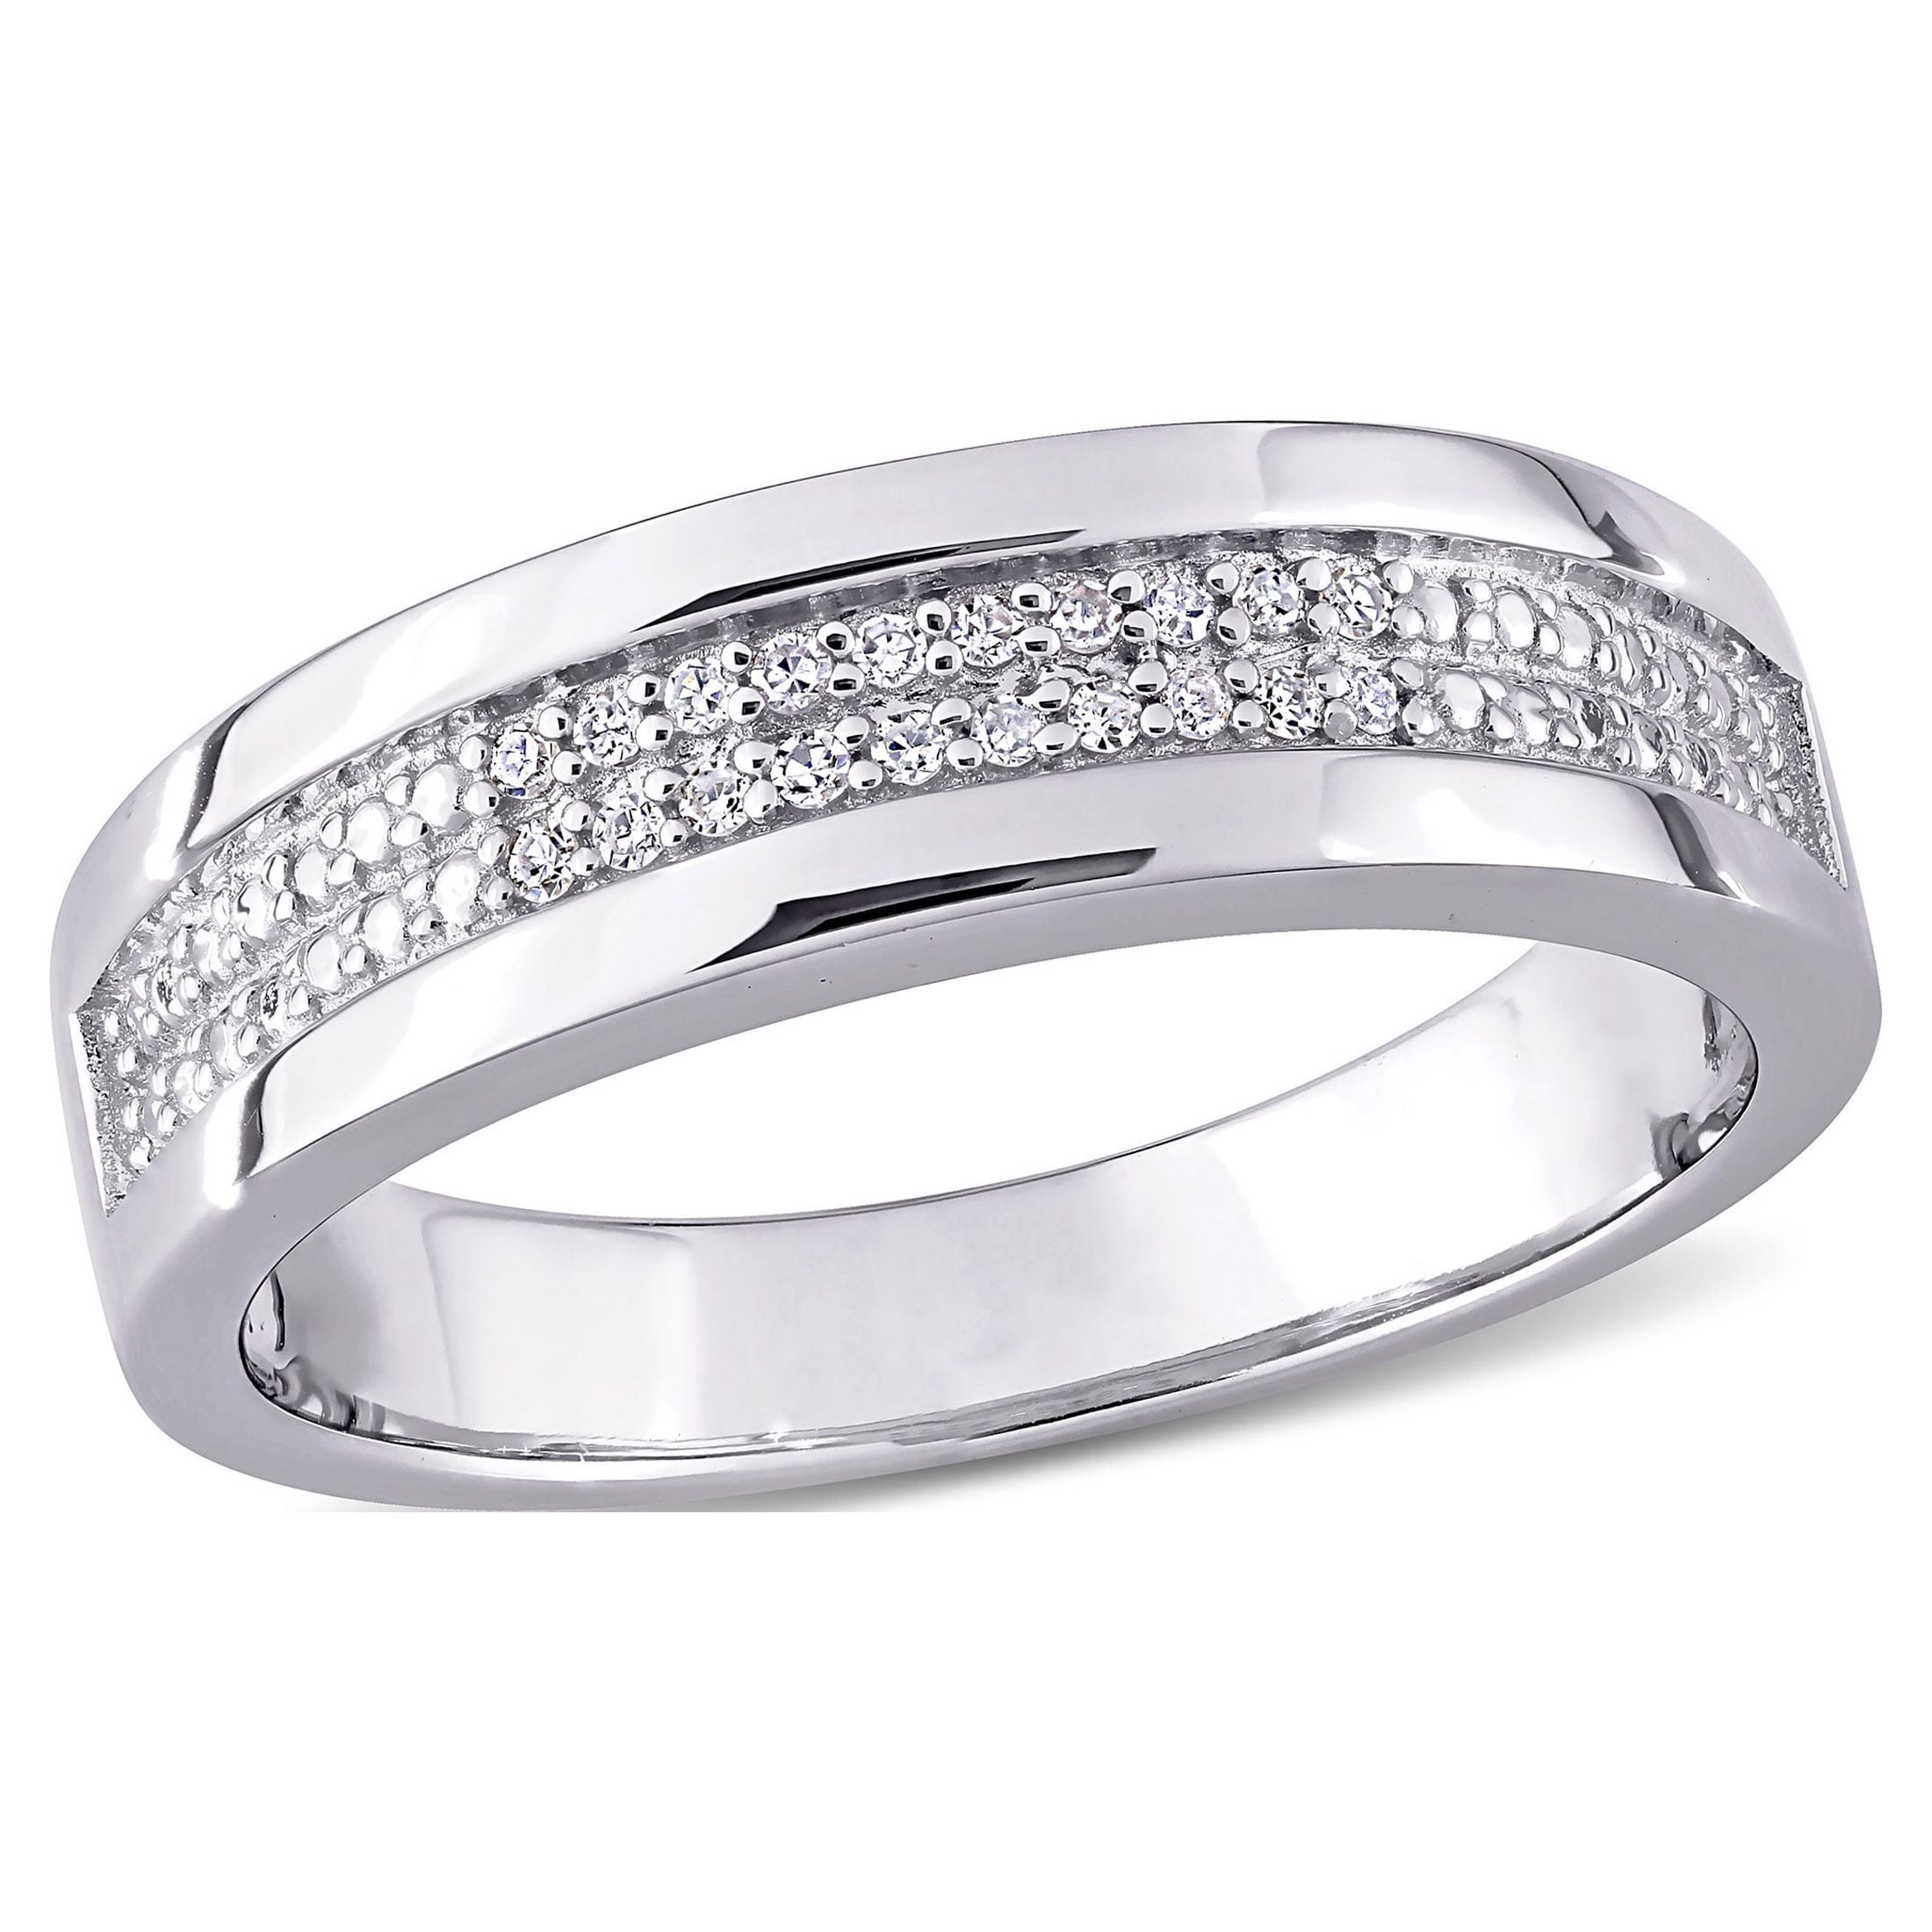 Mens Silver Ring, Silver Rings For Men With Cz, Wh Gender: Women at Best  Price in Jaipur | Valentine Jewellery India Pvt. Ltd.